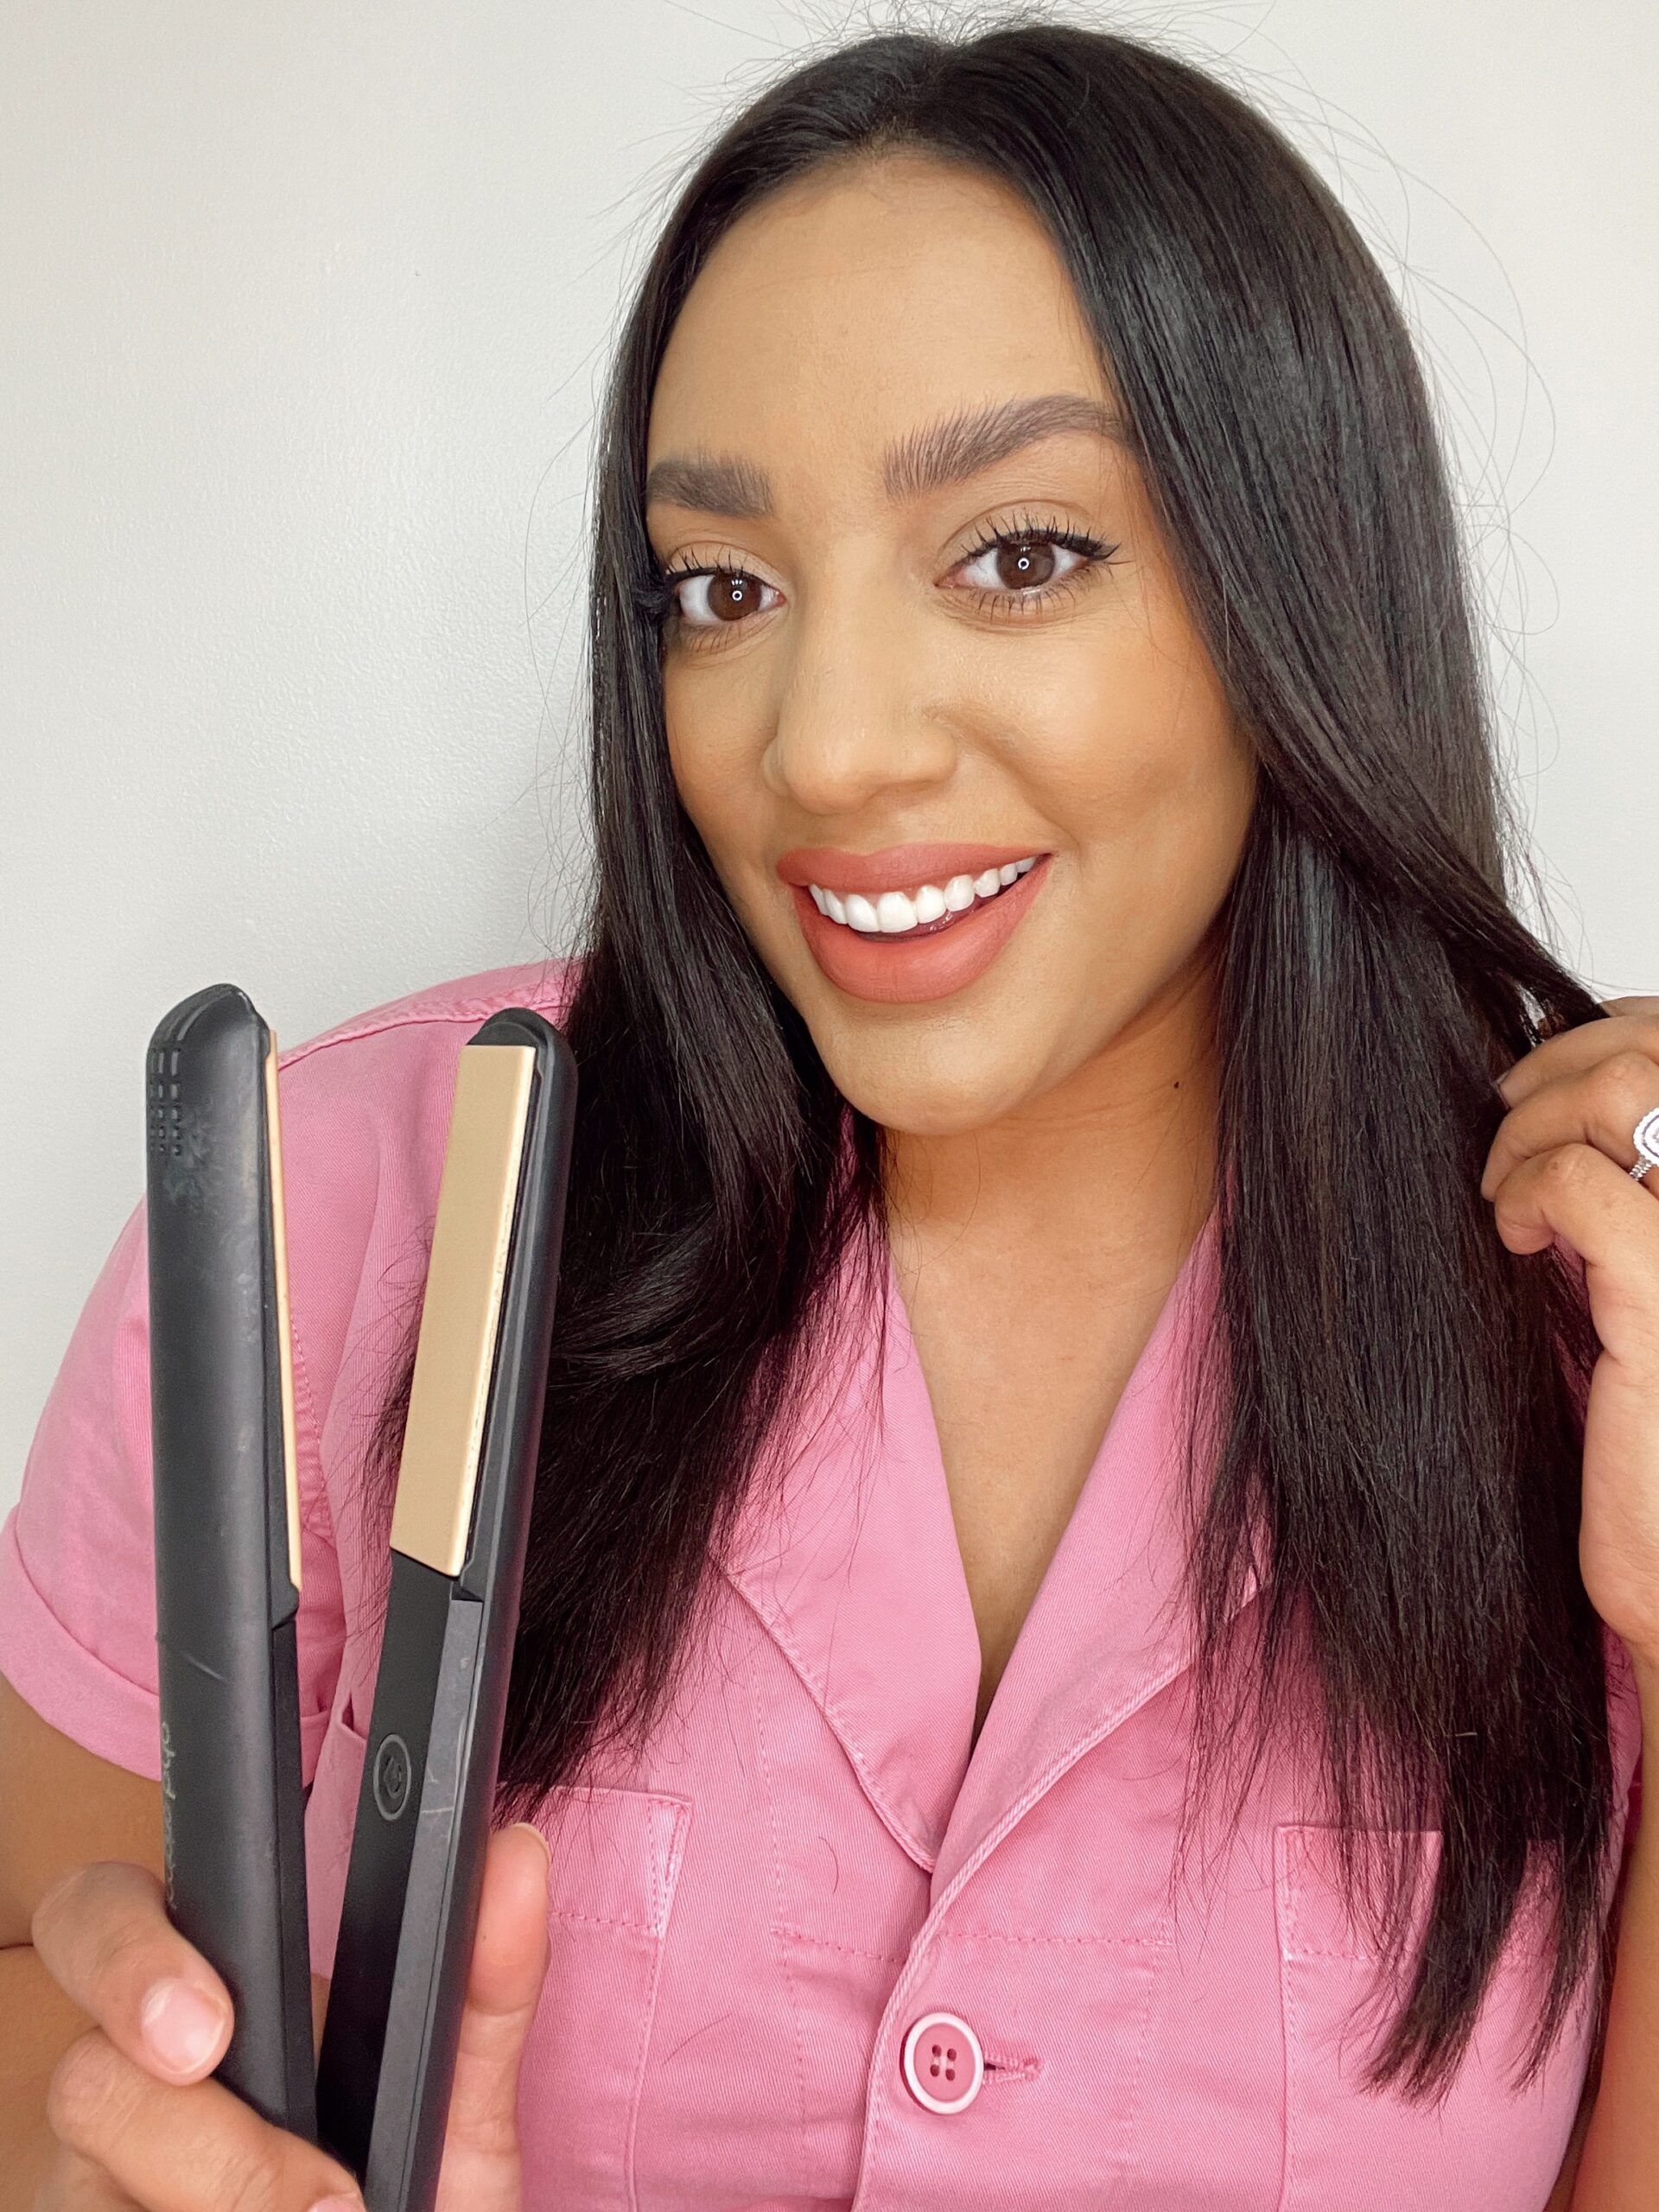 GHD’s New Original Styler Review!